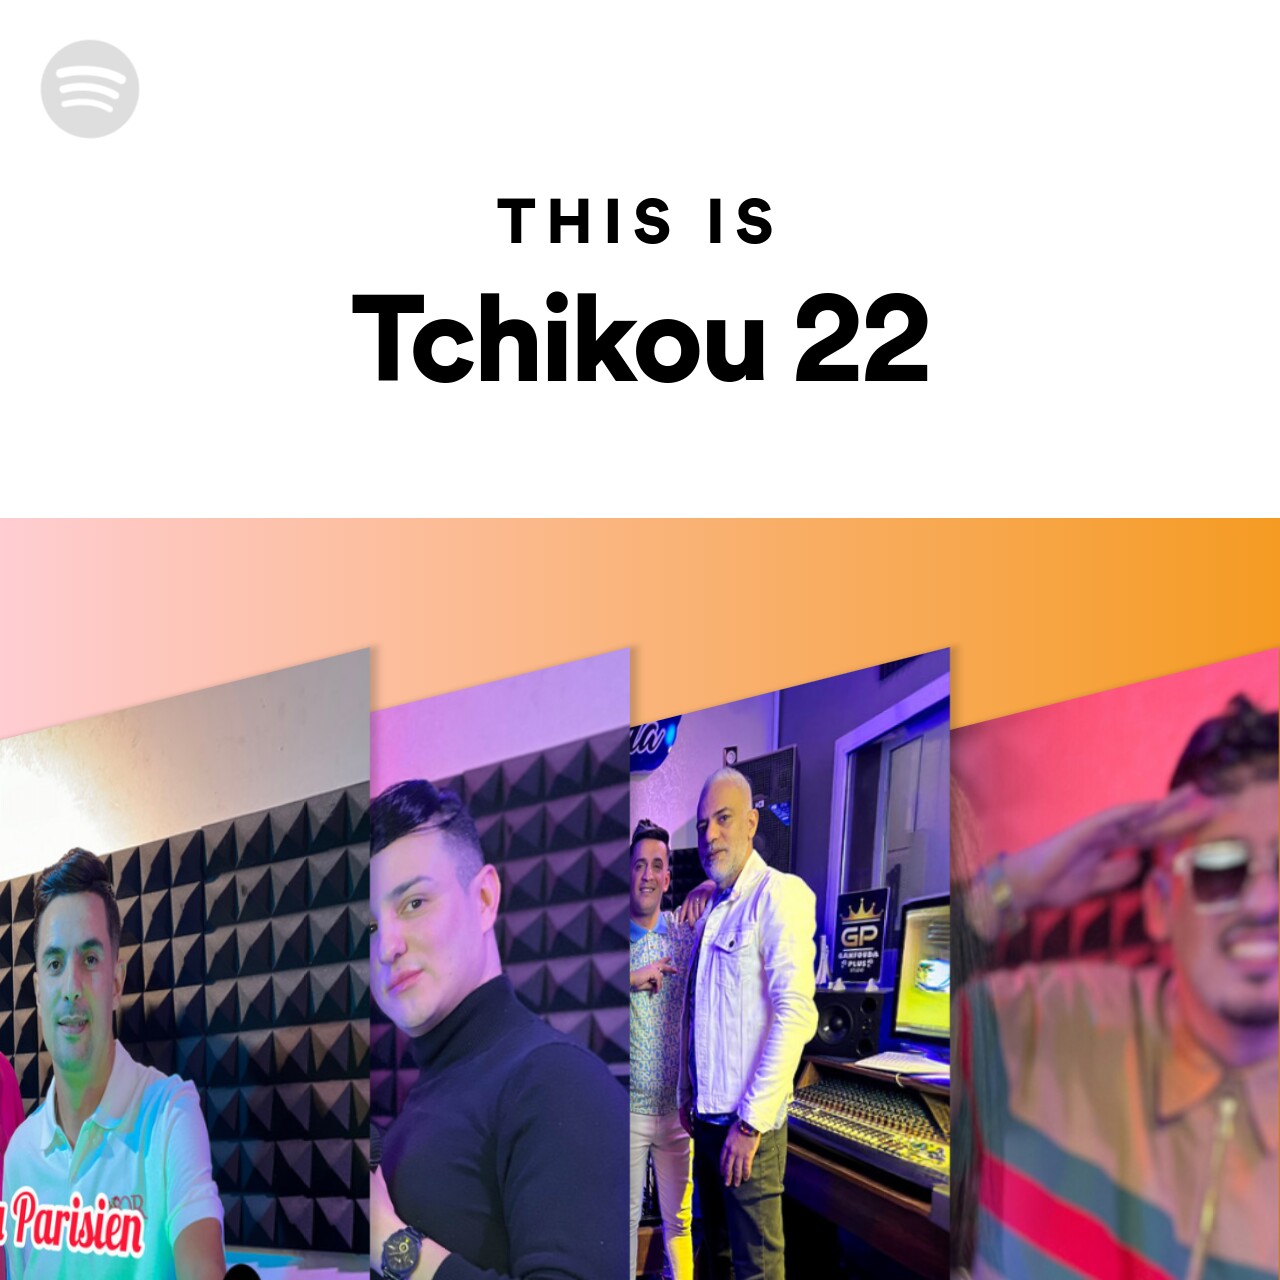 This Is Tchikou 22